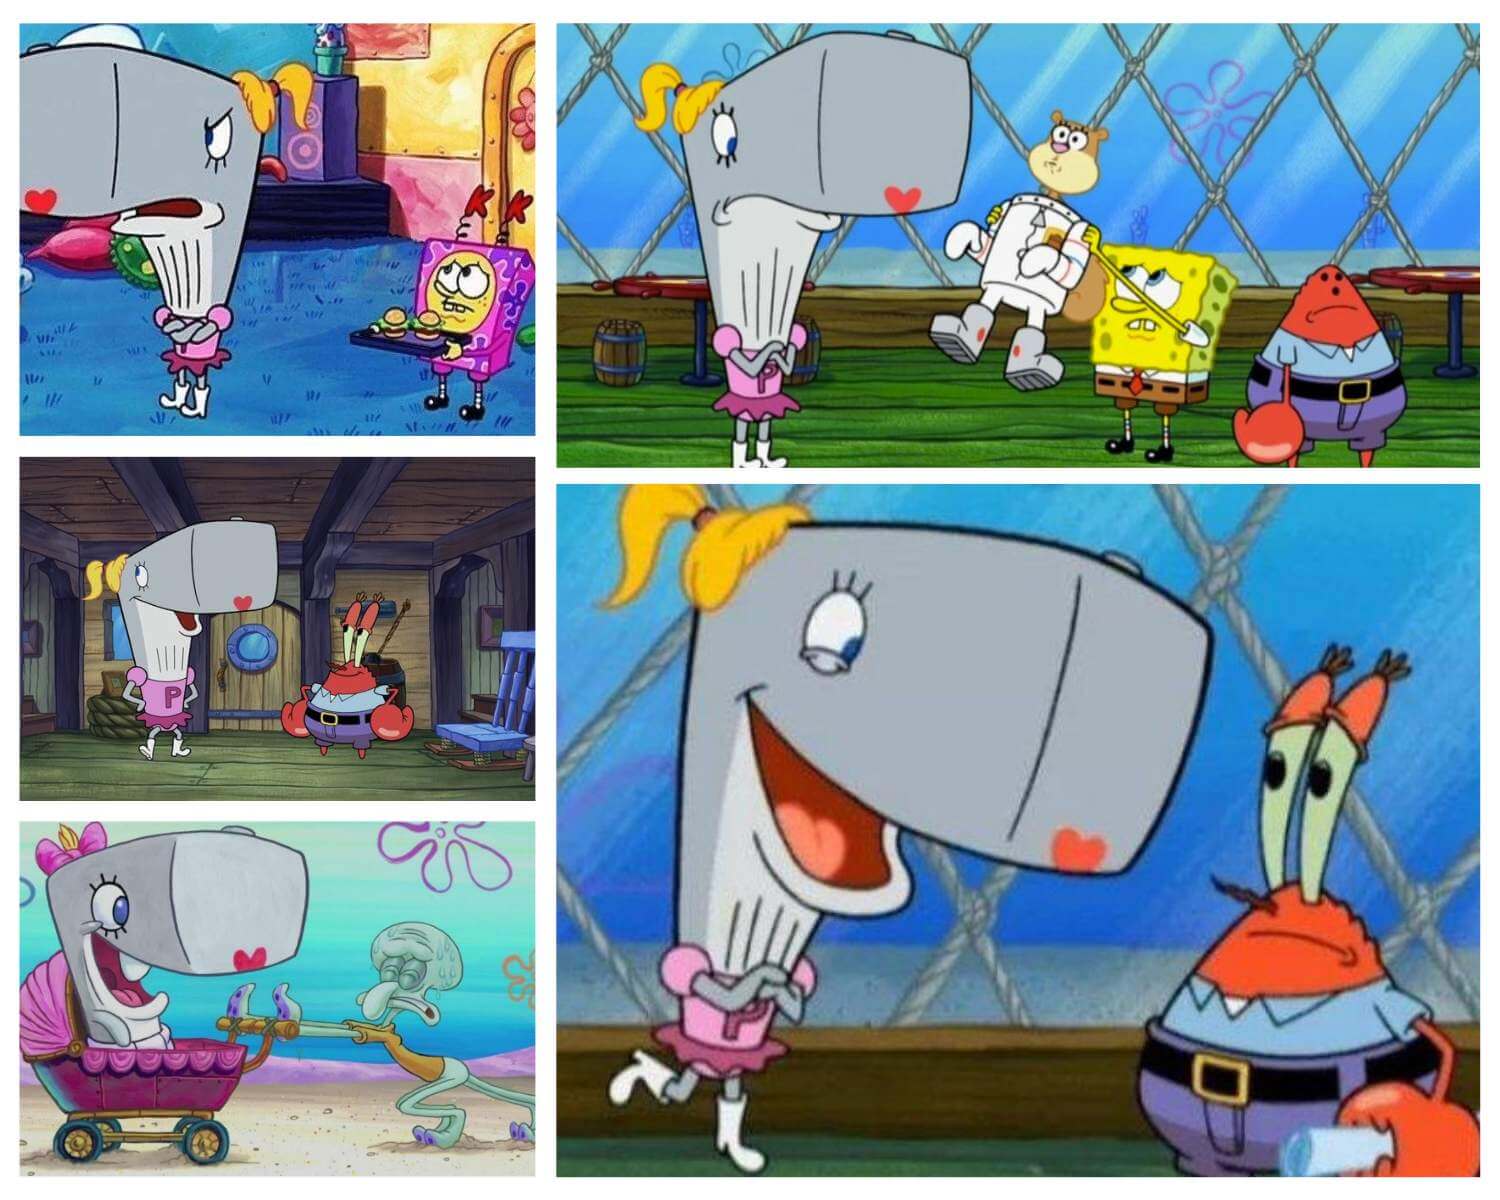 Pearl Krabs Physical Appearance